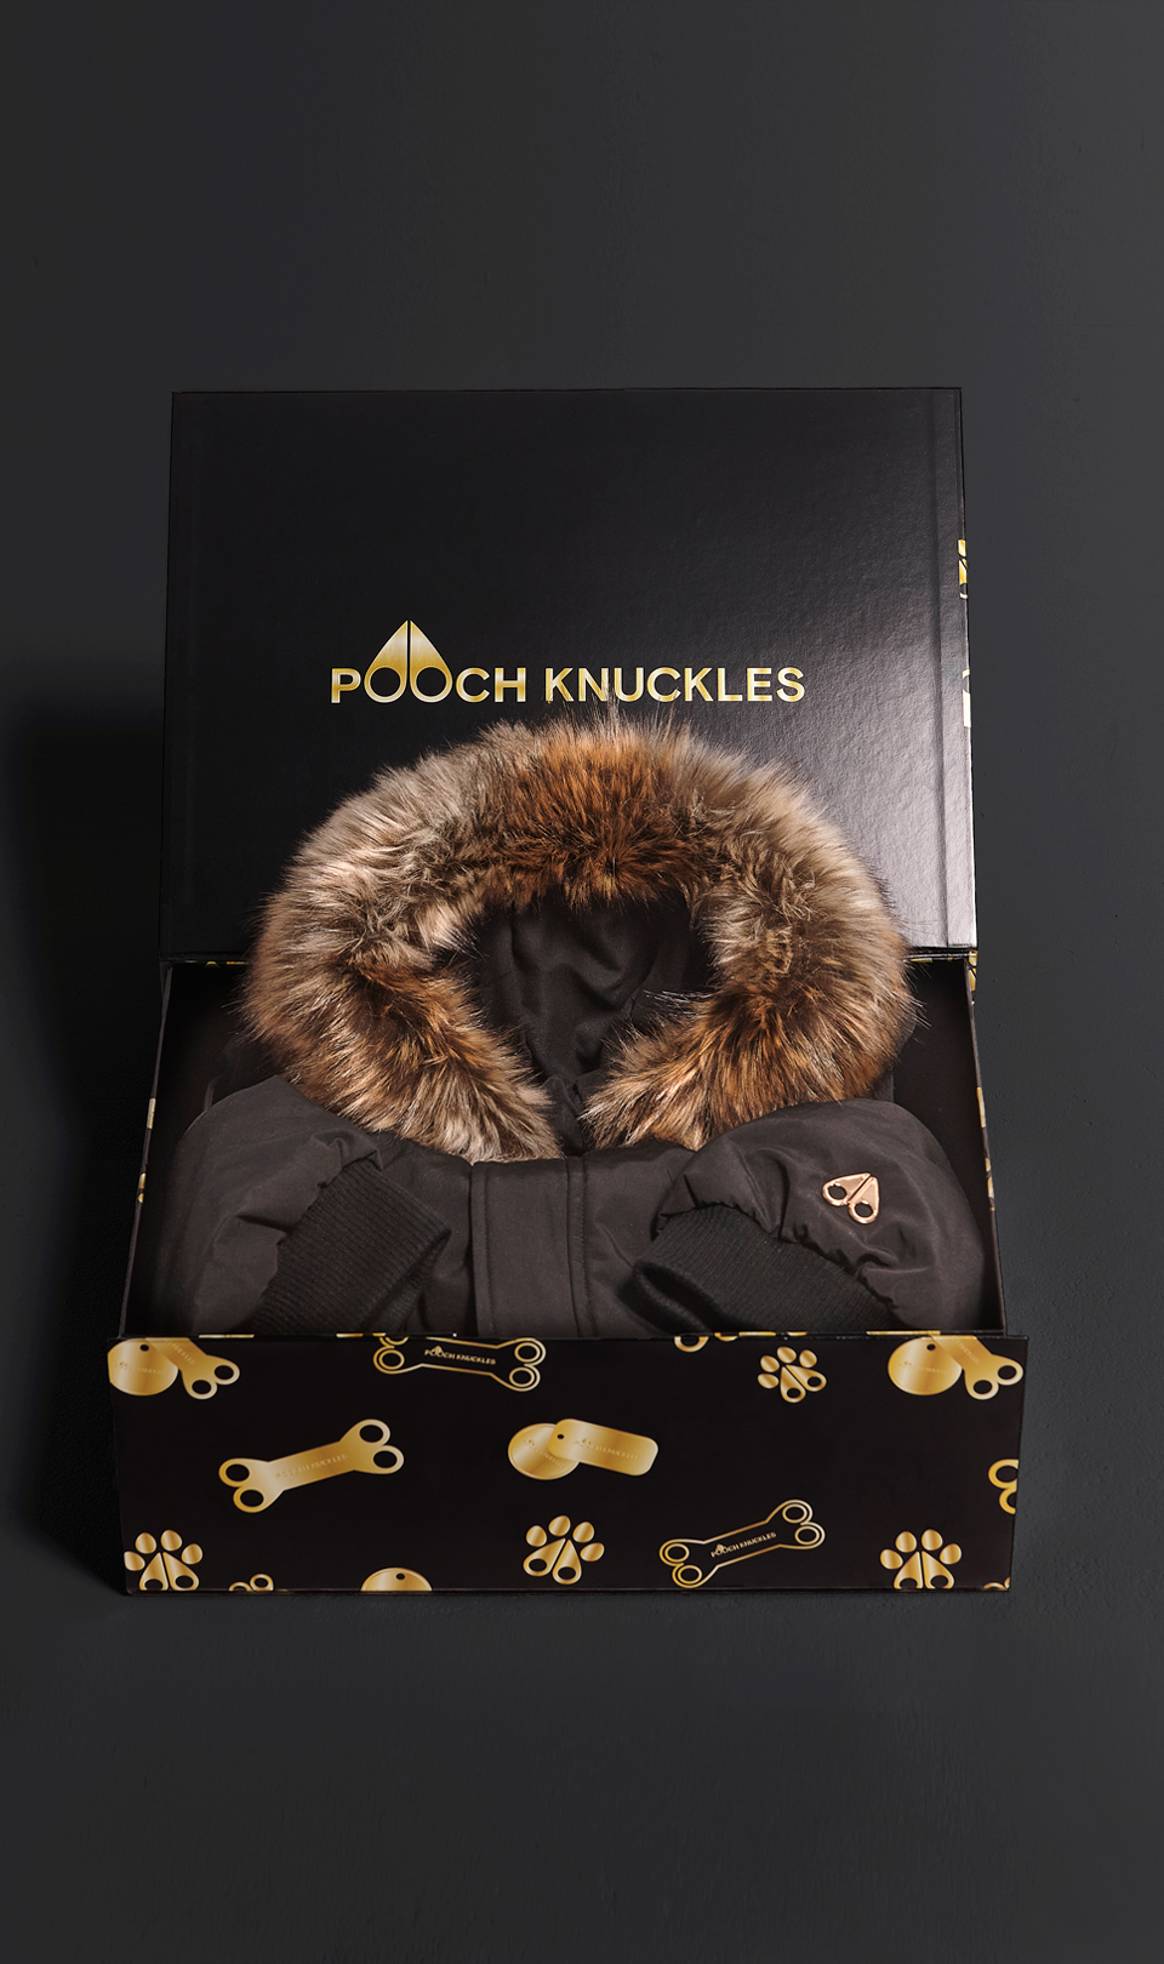 Image: Moose Knuckles; Pooch Knuckles photographed by Donat Boulerice